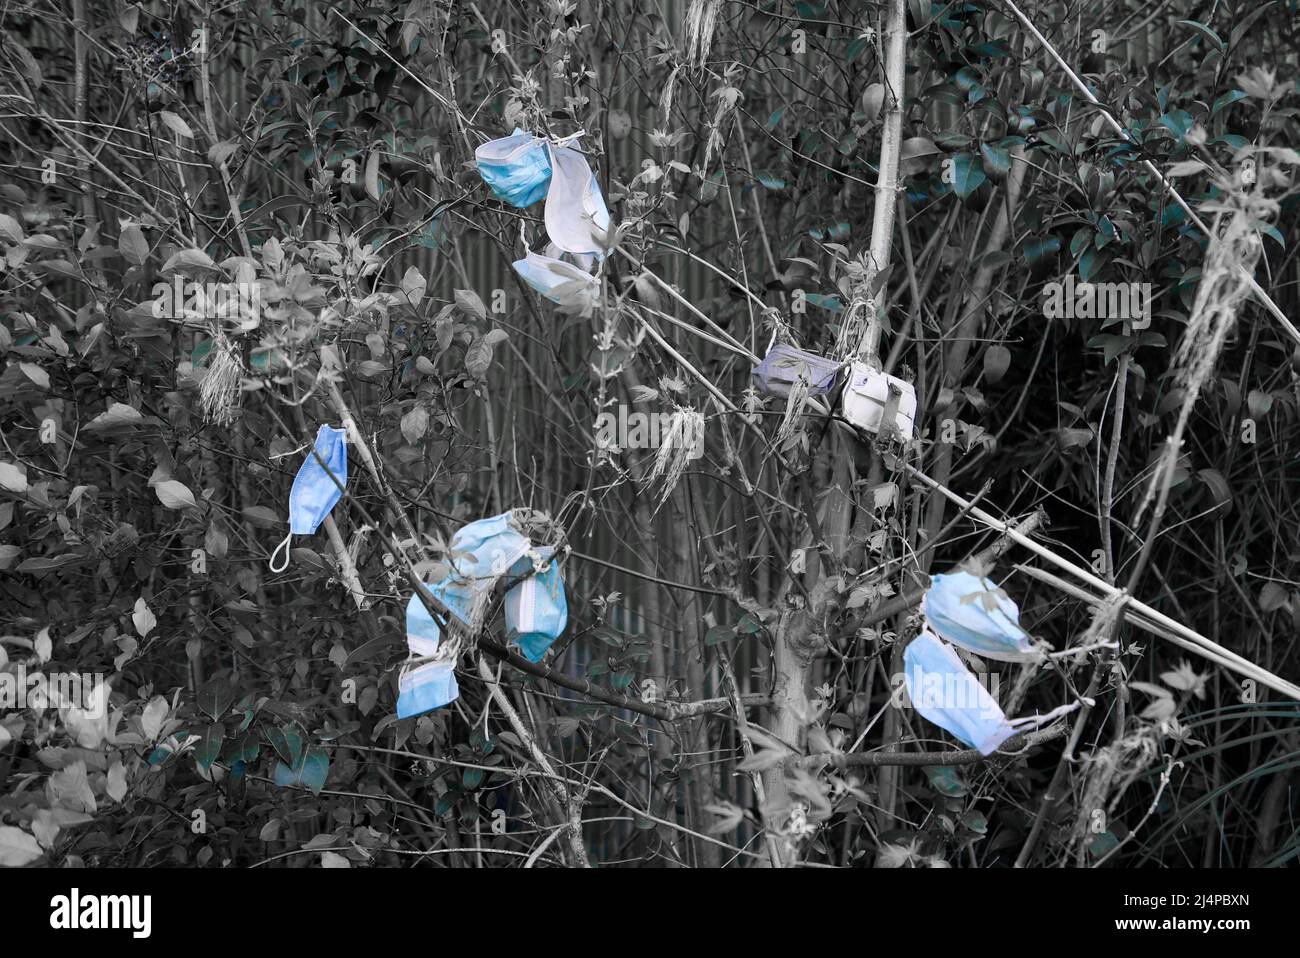 Dozens of PPE face masks from the Covid-19/Coronavirus pandemic hanging in trees and bushes, as covid waste generates litter. Face coverings pollution Stock Photo